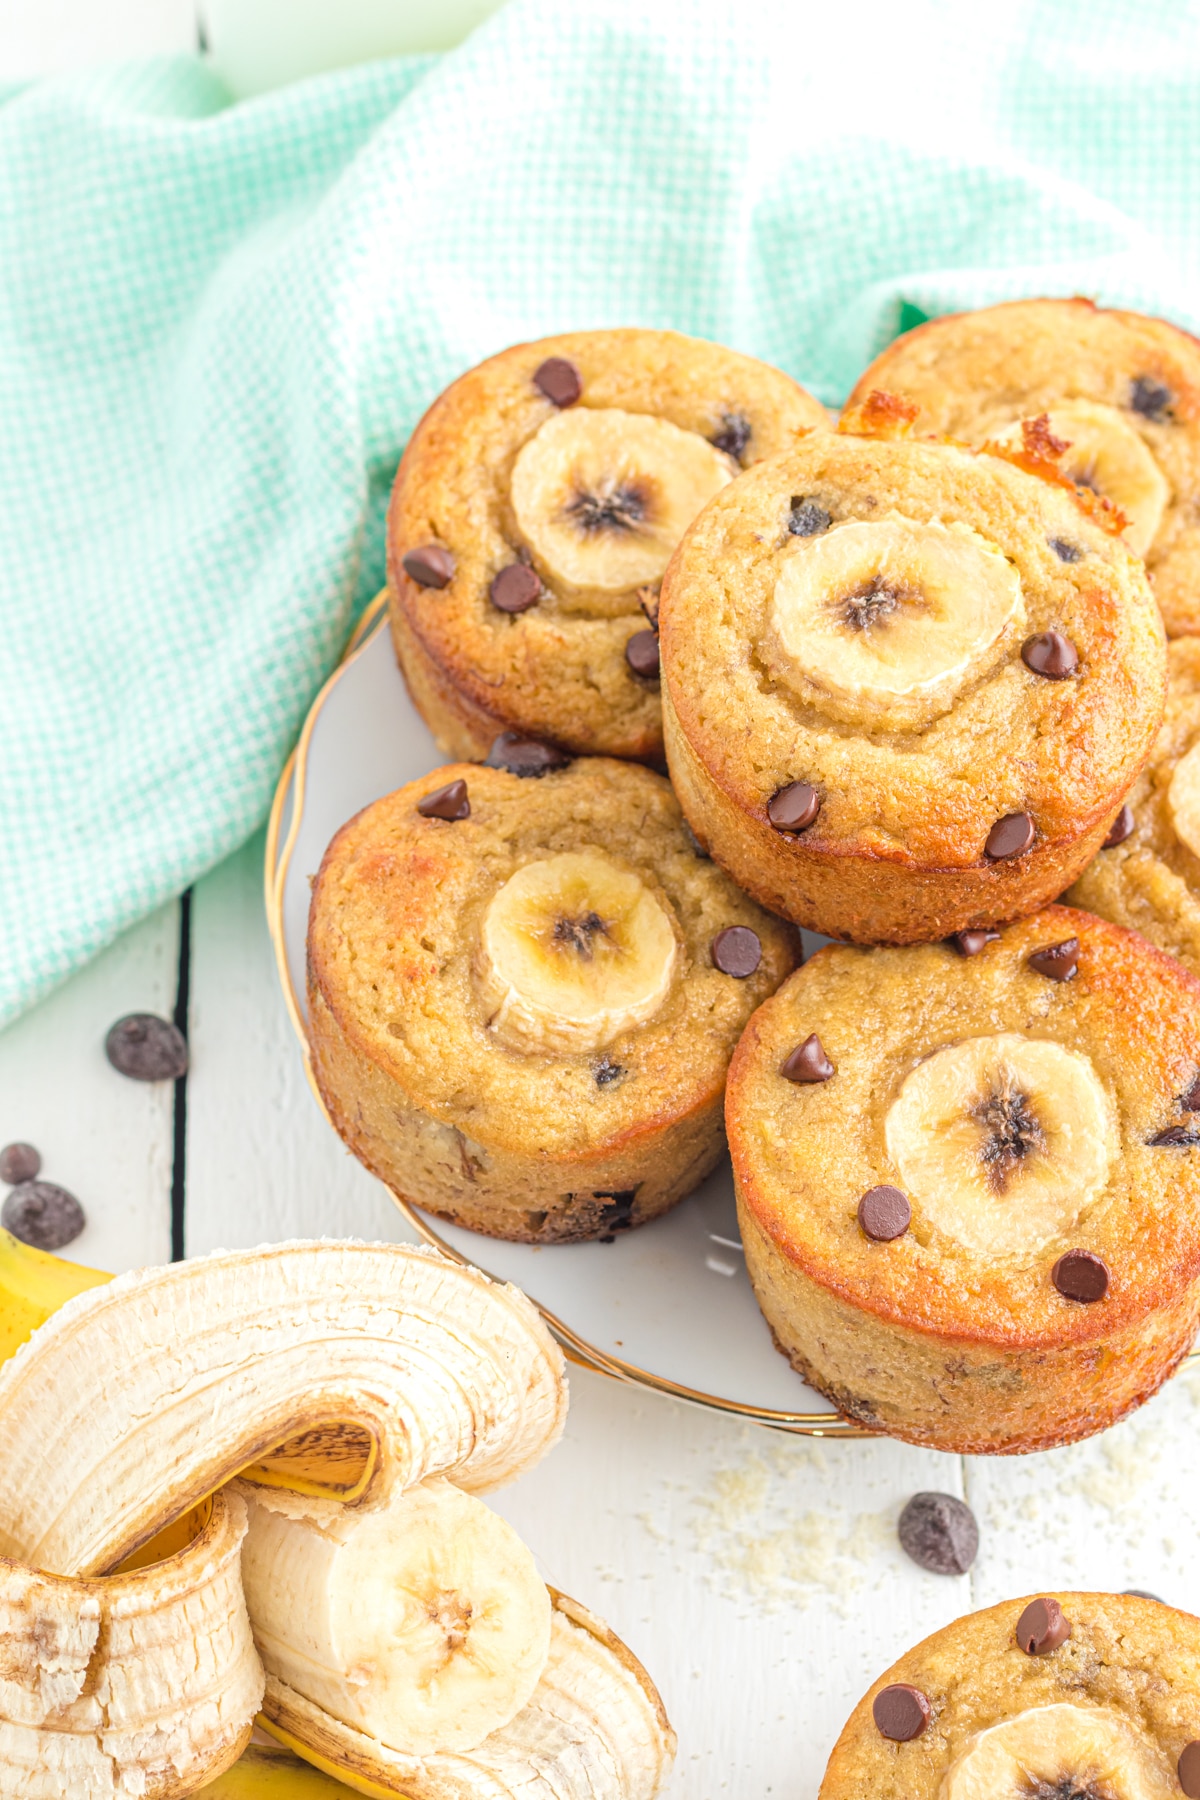 Banana muffins on a plate on a table with a banana and chocolate chips.